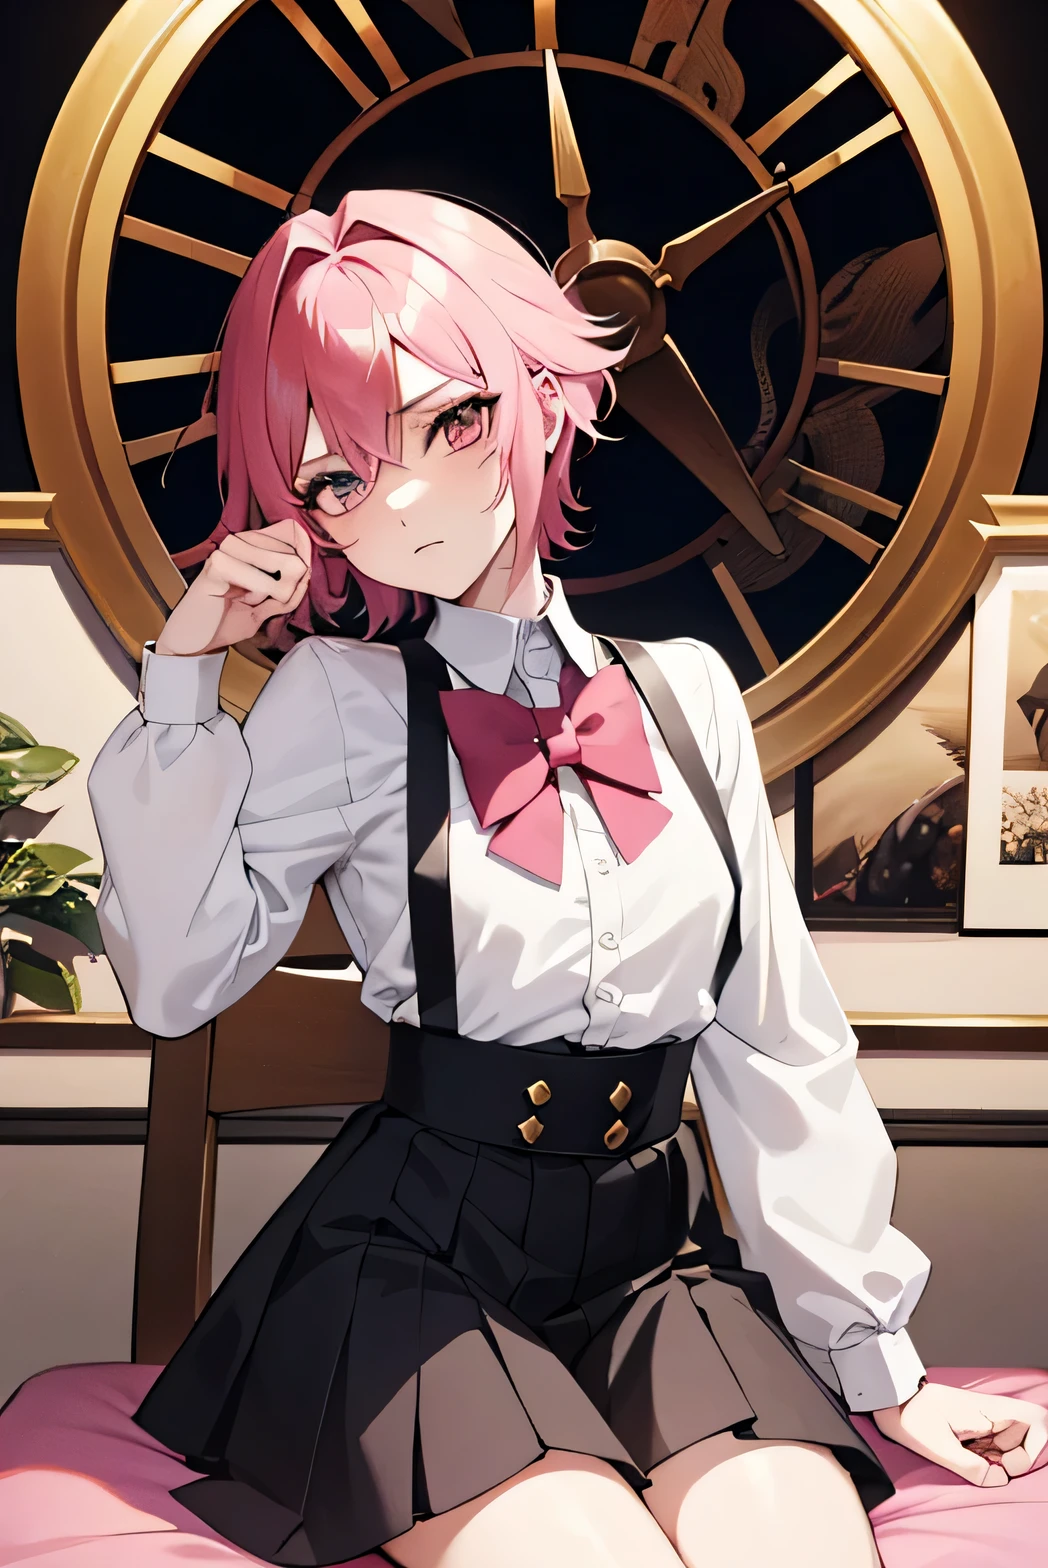 there is a cartoon picture of feminine boy with short pink hair, an anime drawing by Ei-Q, pixiv contest winner, gothic art, anime moe artstyle, 1 7 - year - old anime, anime style portrait, in an anime style, demon femboy, flat anime style, cute, crossdresser in , cute pose